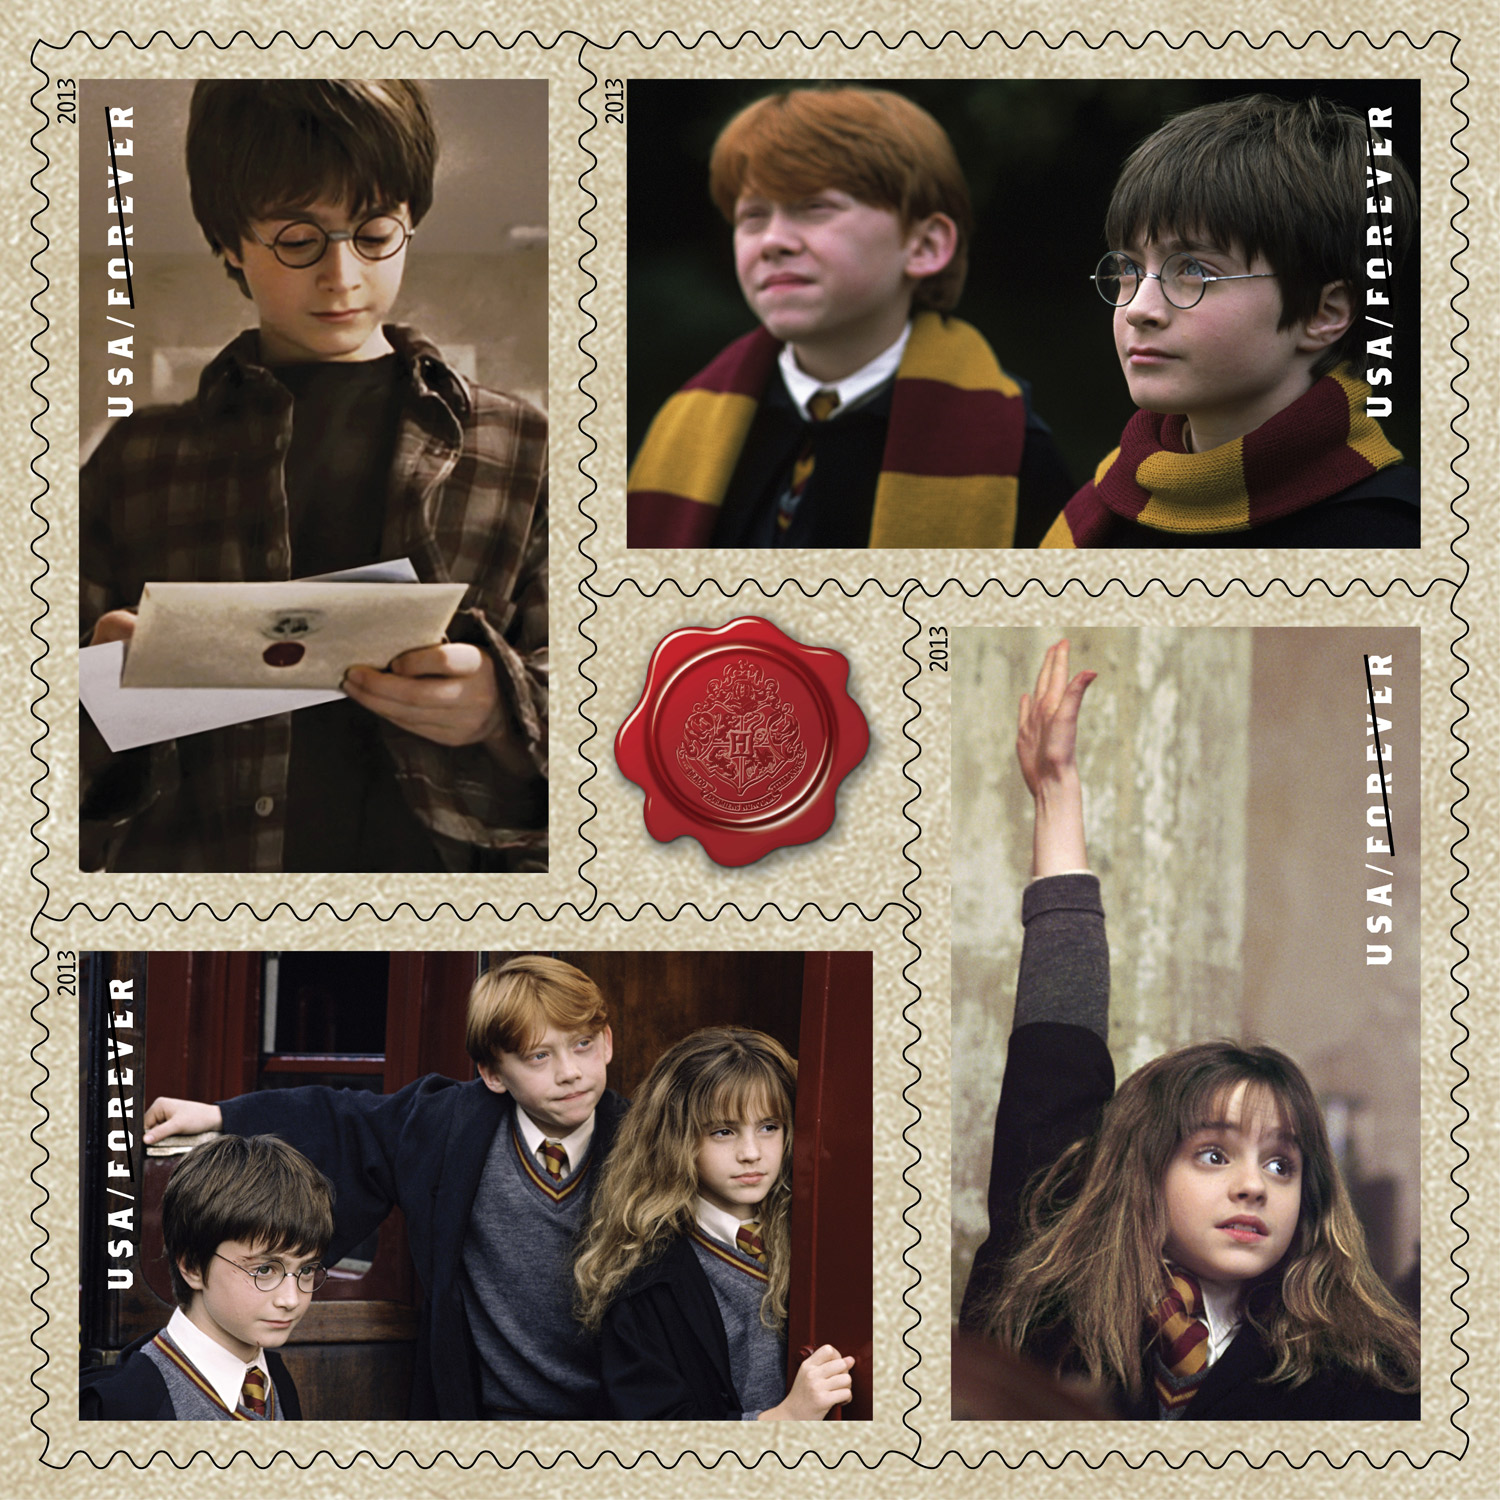 Harry Potter Stamps Anger Stamp Collectors